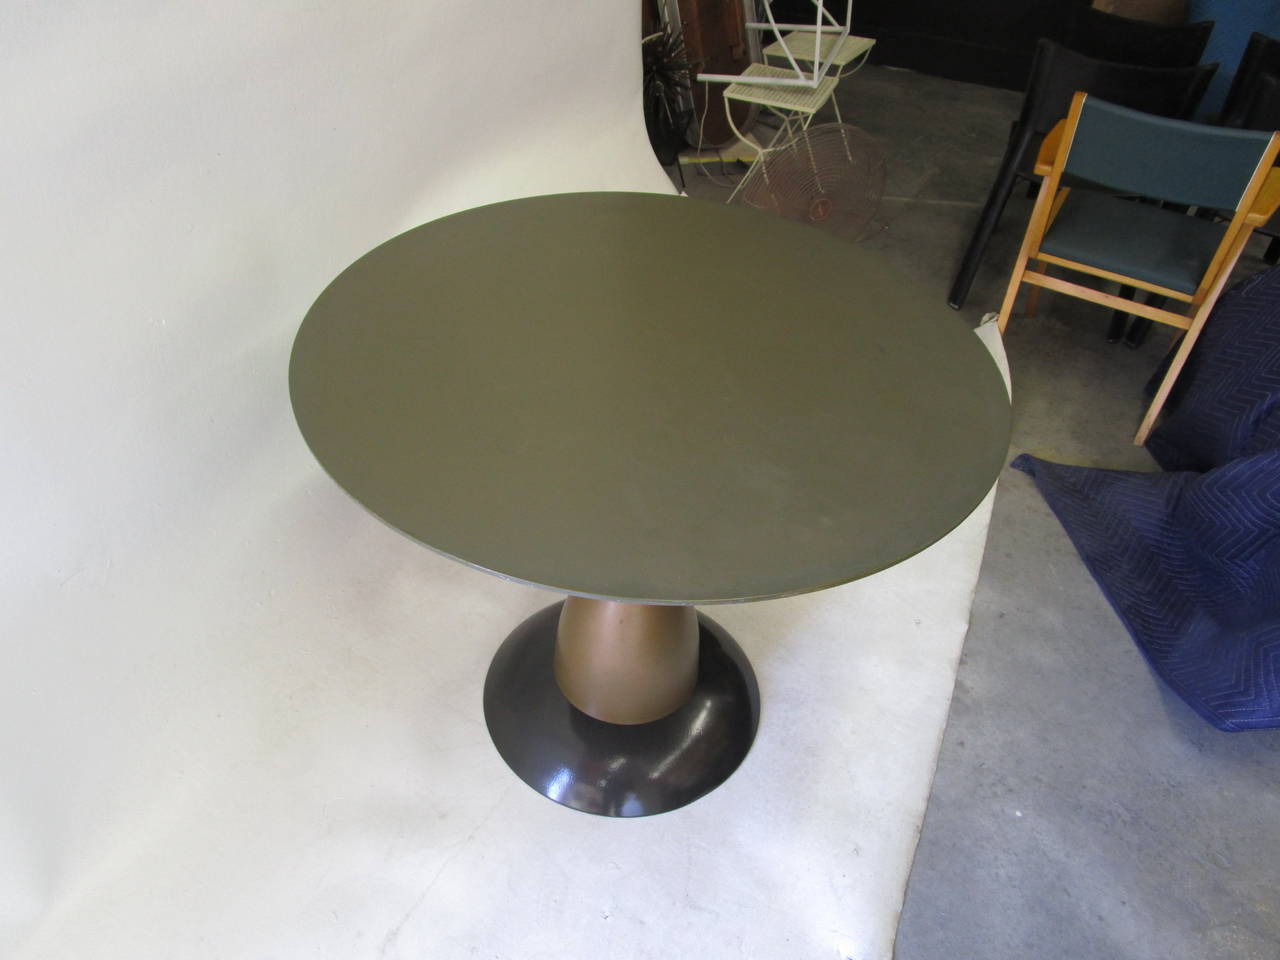 The table was designed in 1983 and has black enameled steel  pedestal made of 3 different parts.and a circular enameled steel top.